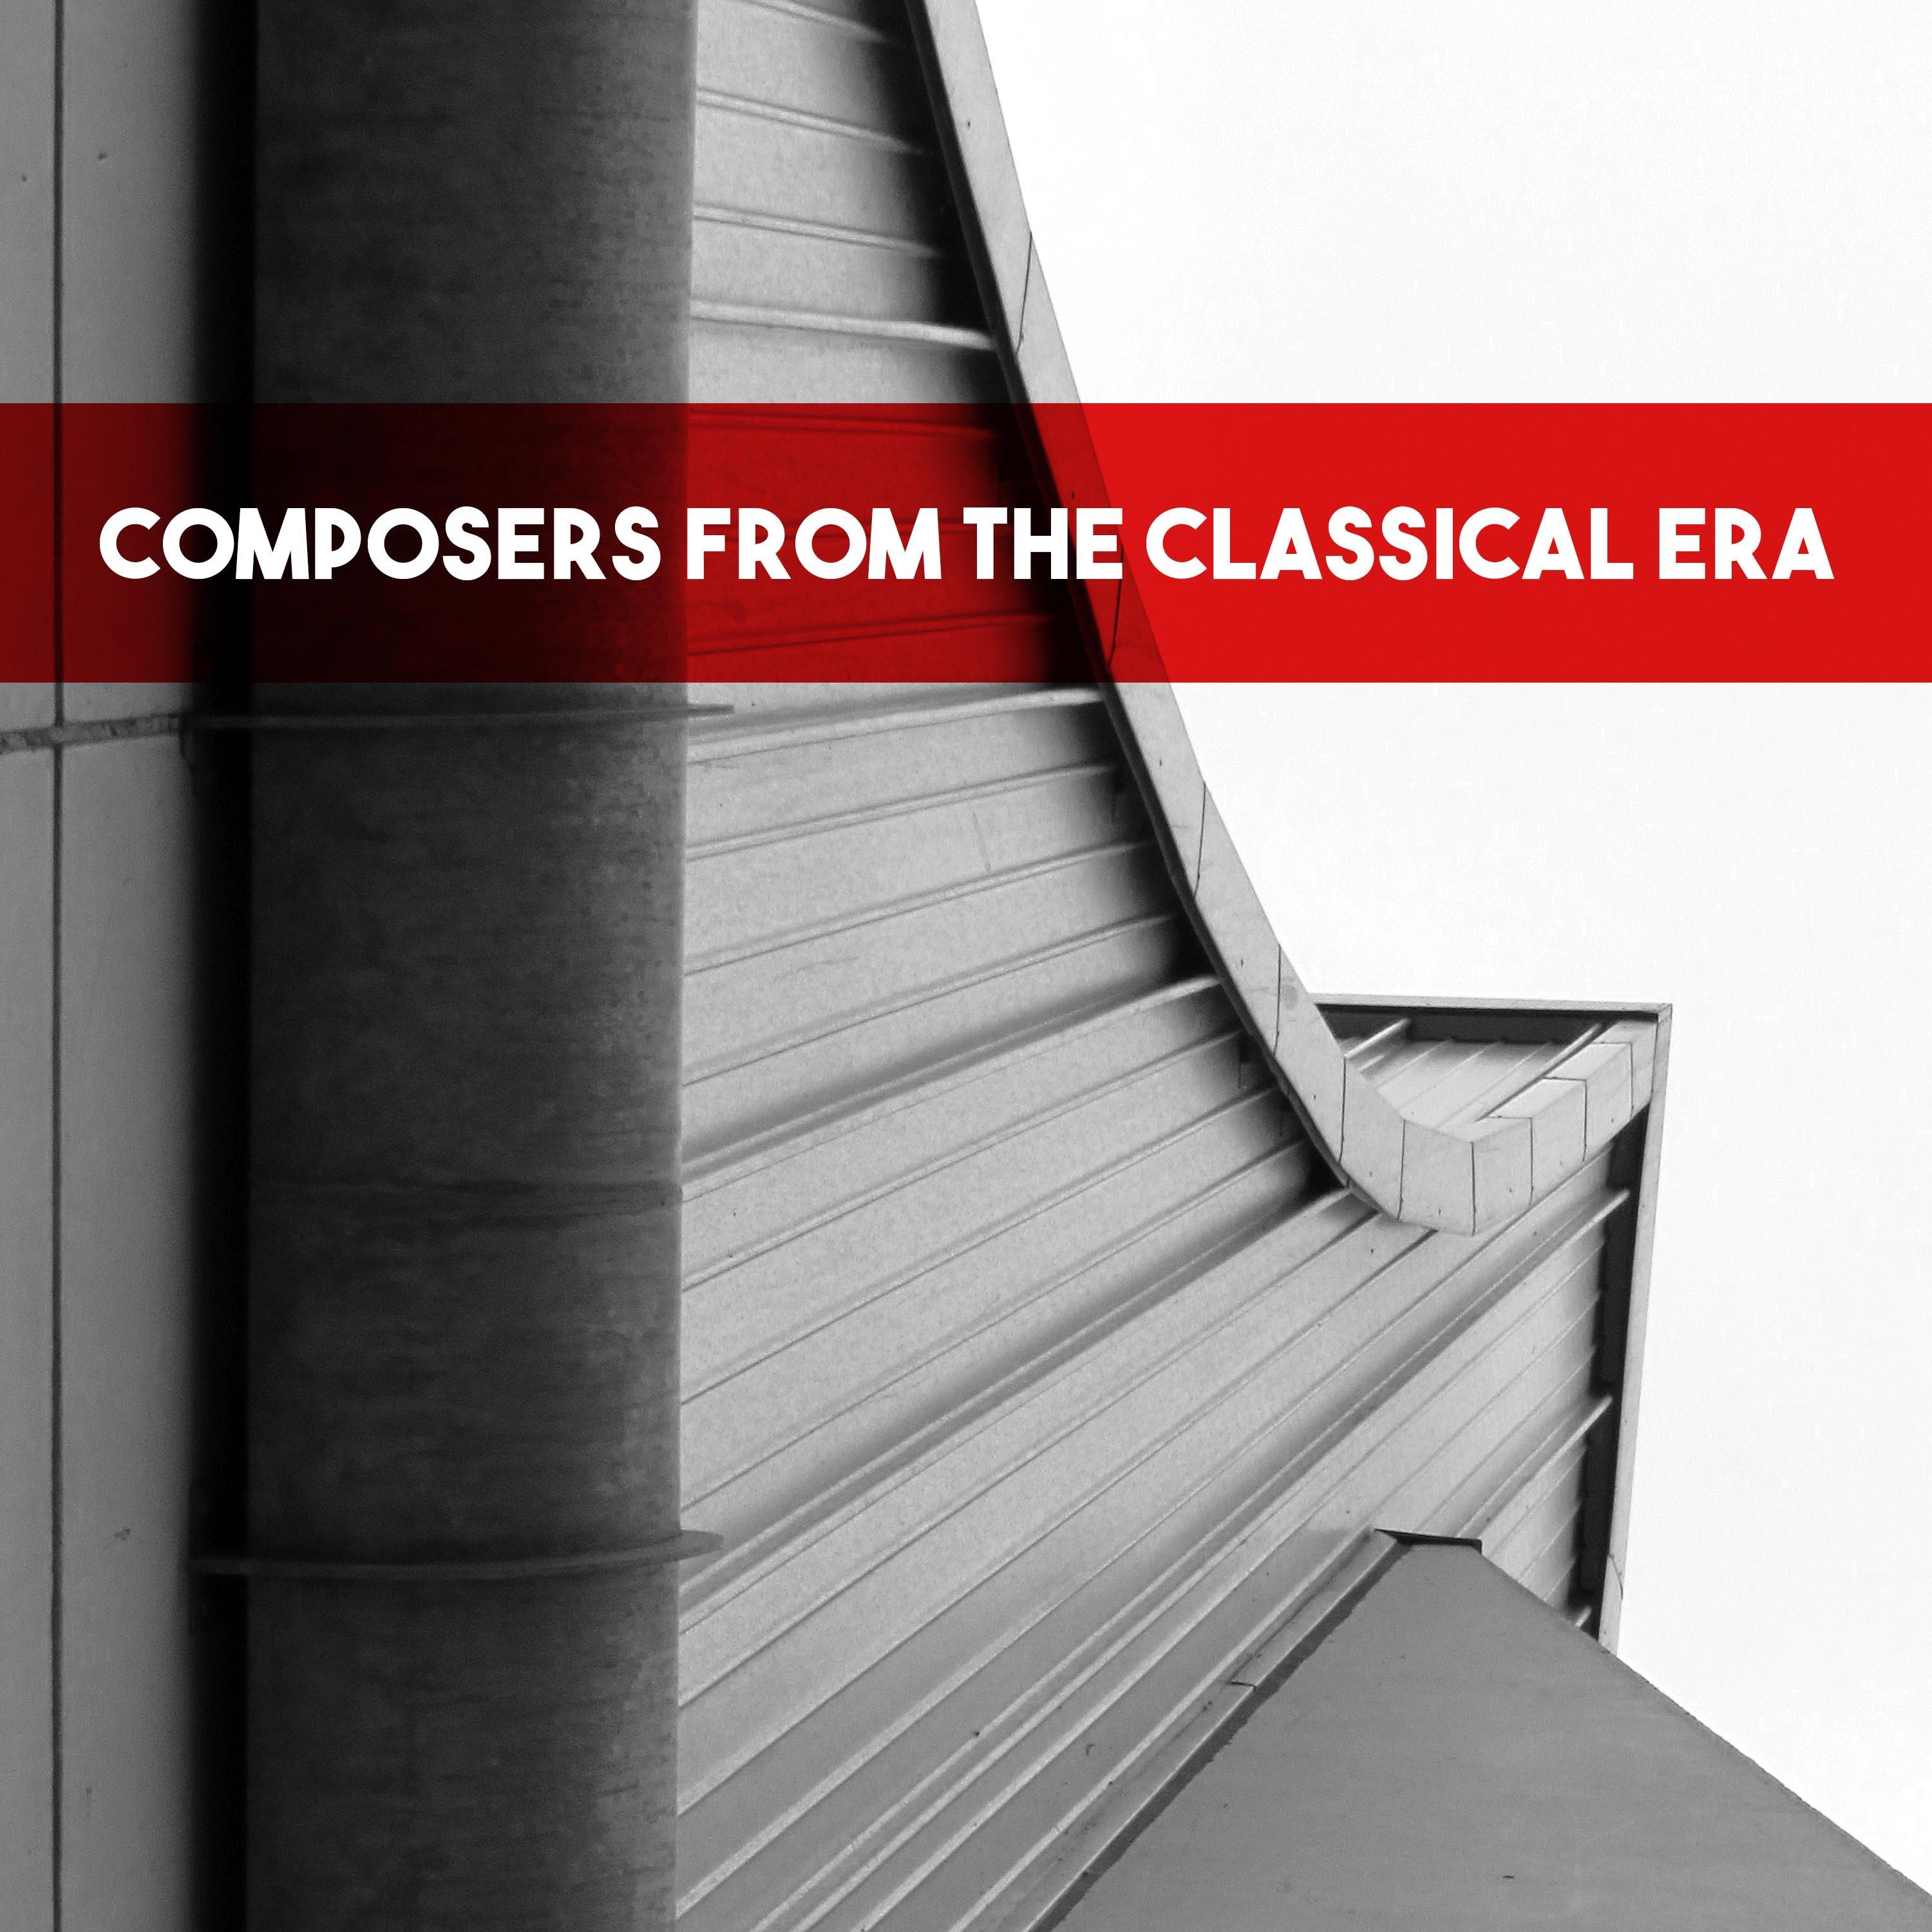 Composers from the Classical Era